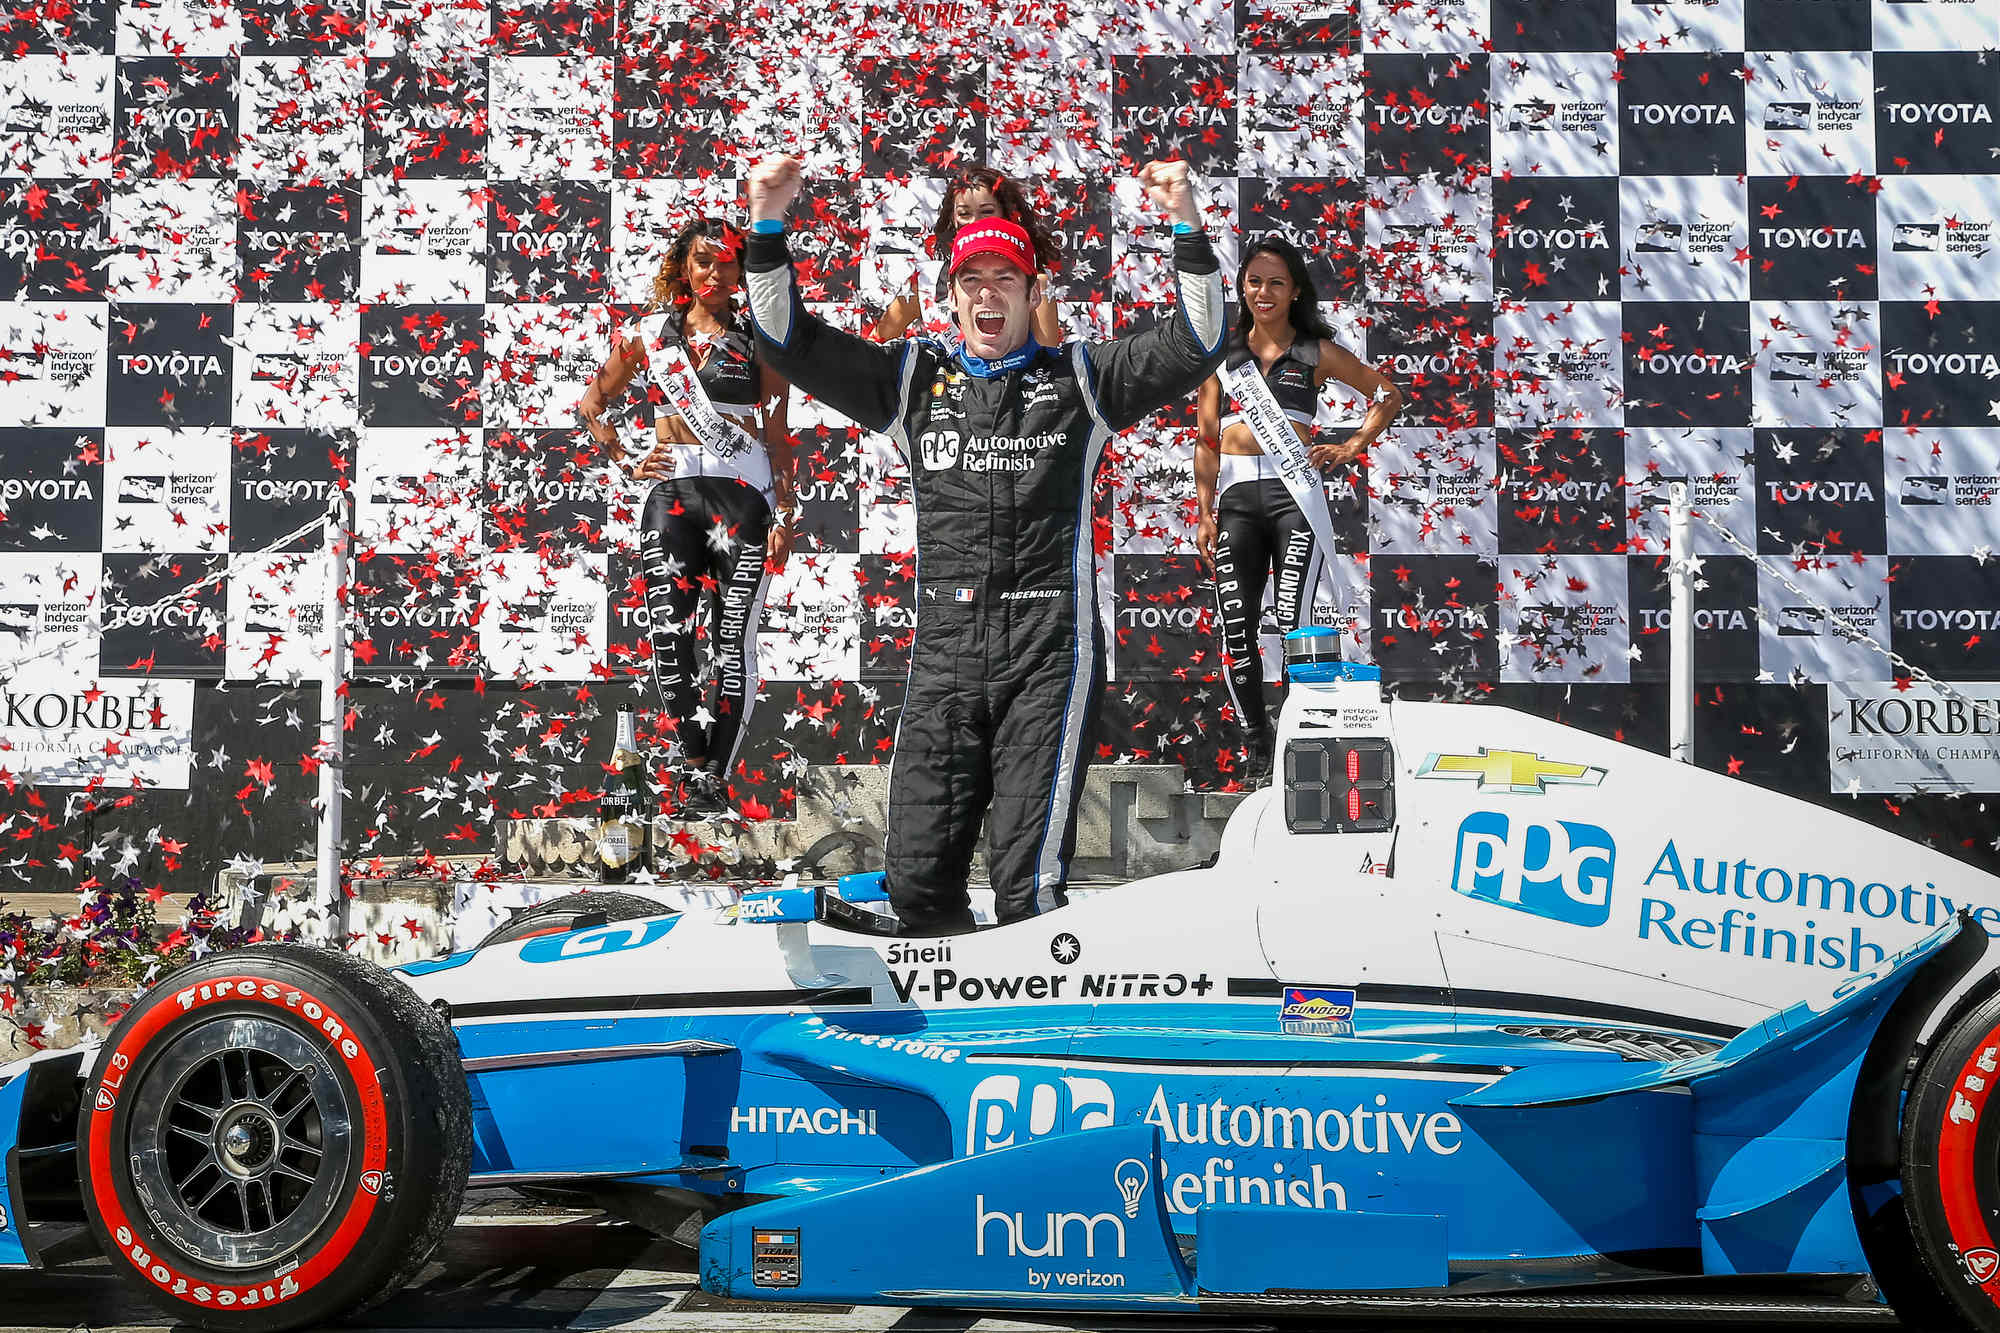 Can Pagenaud make it two wins in a row at Long Beach?